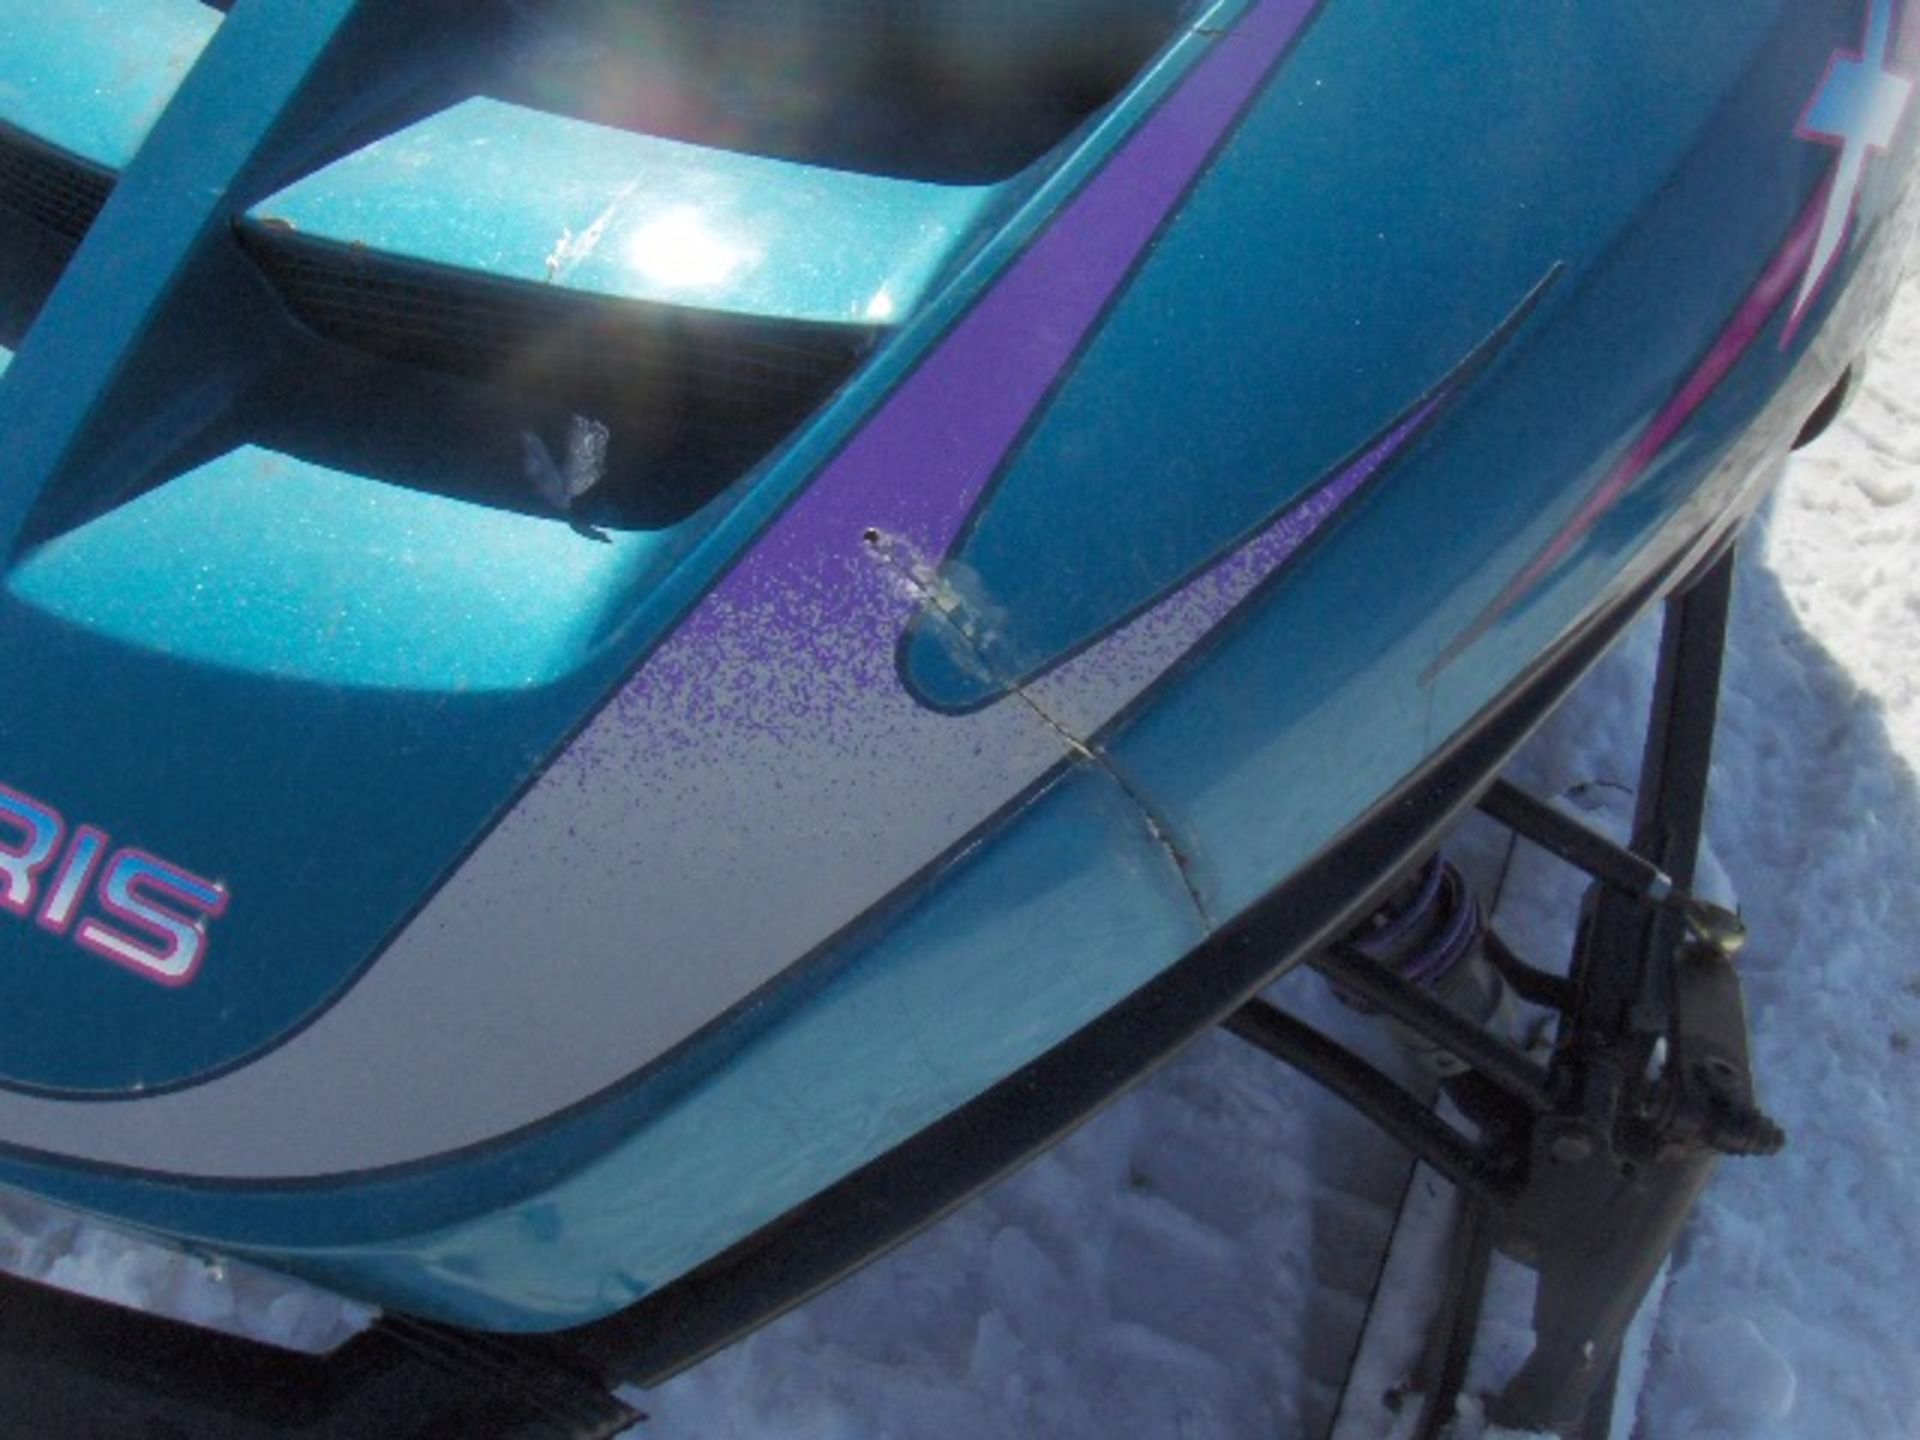 1996 POLARIS 600 973756 318596 Snowmobile, electric start, reverse, with a bill of sale only - Image 2 of 3